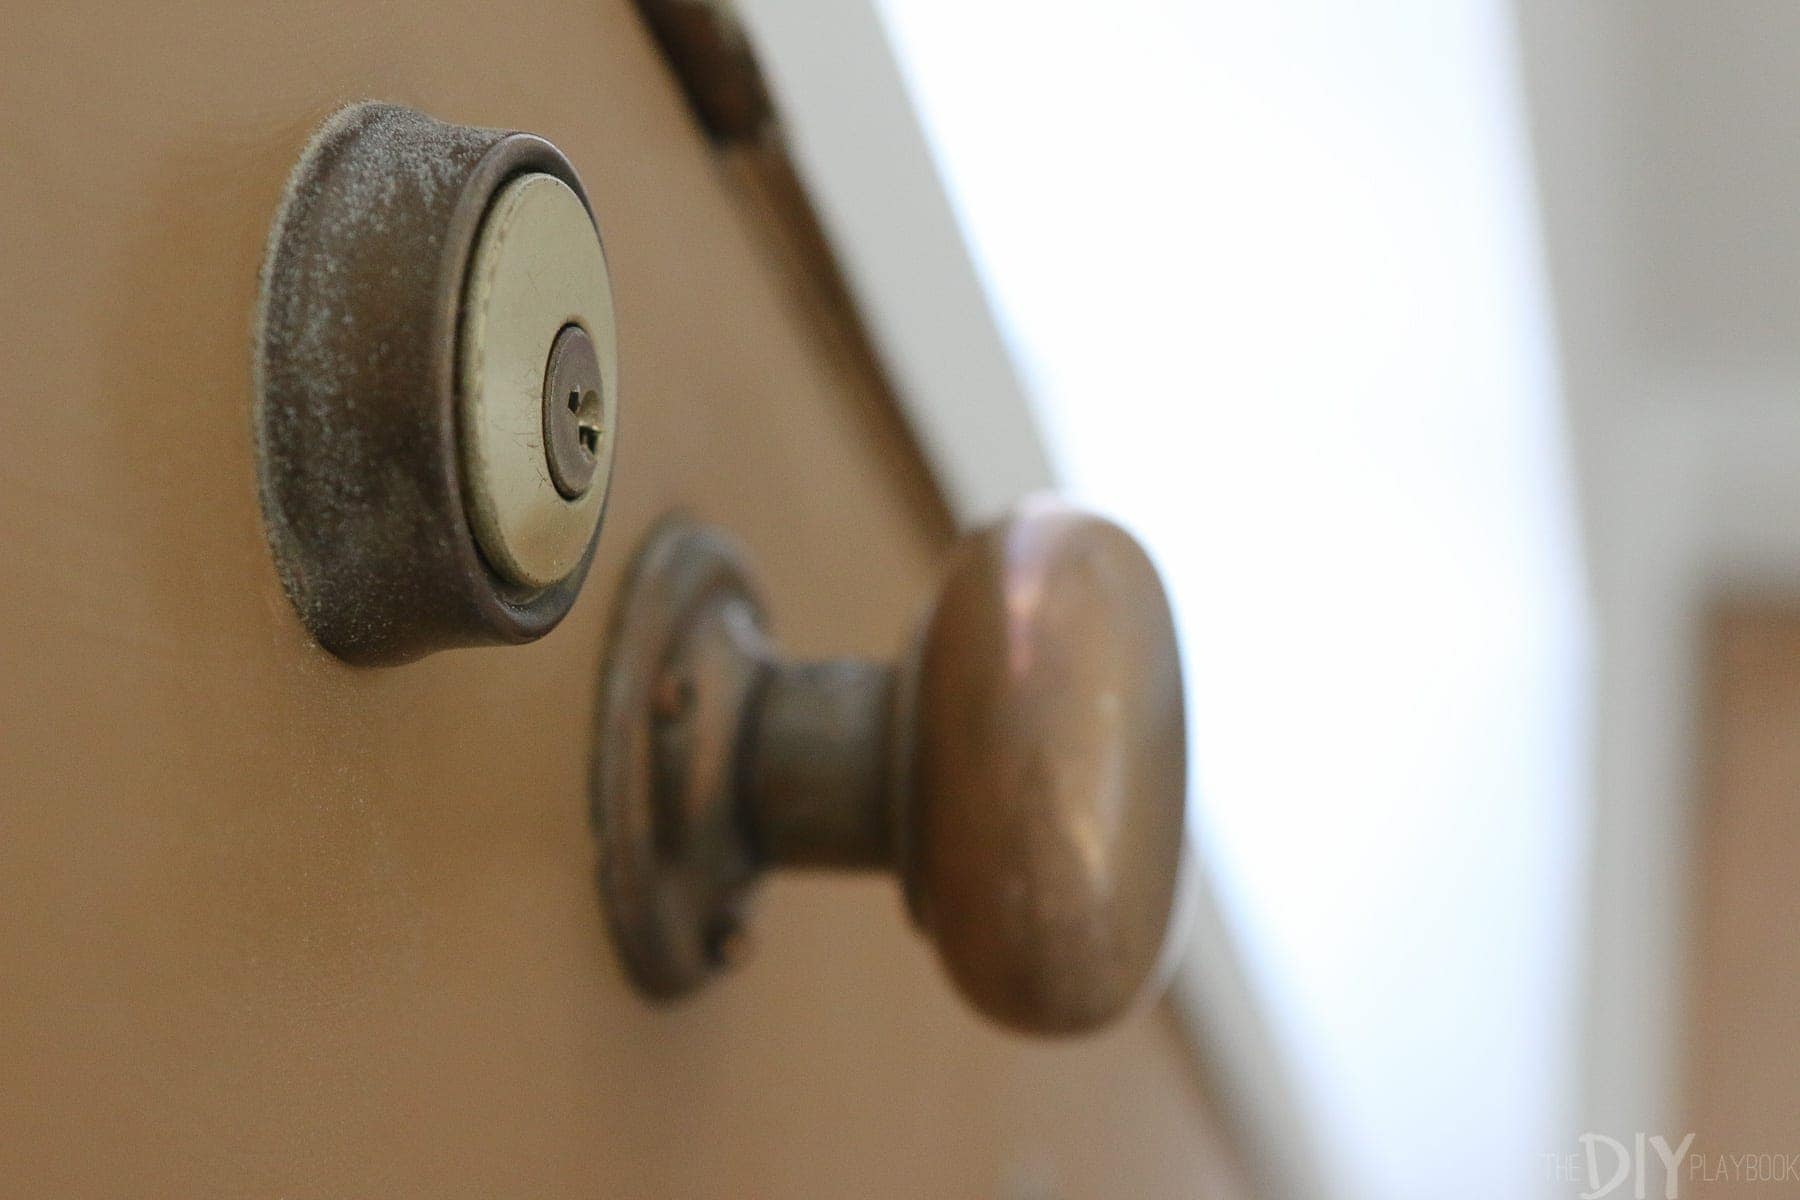 Mortise locks are very reliable, but these old-school locks come with their challenges